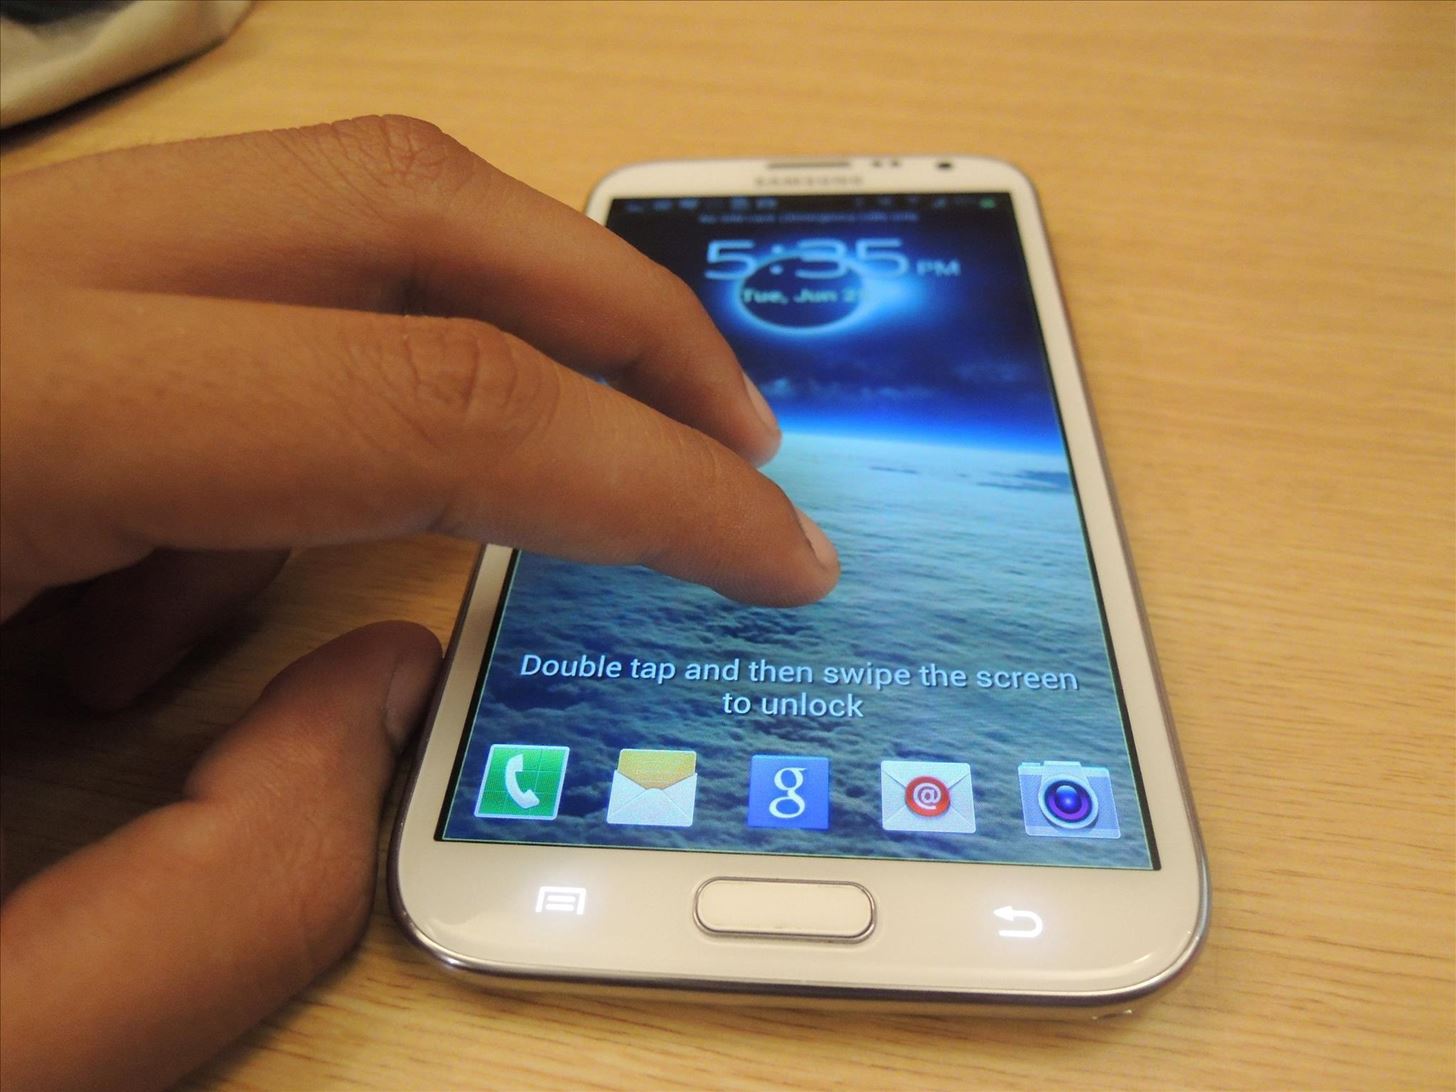 How to Fix Lock Screen Issues When TalkBack & Explore by Touch Are Enabled on Your Samsung Galaxy Note 2